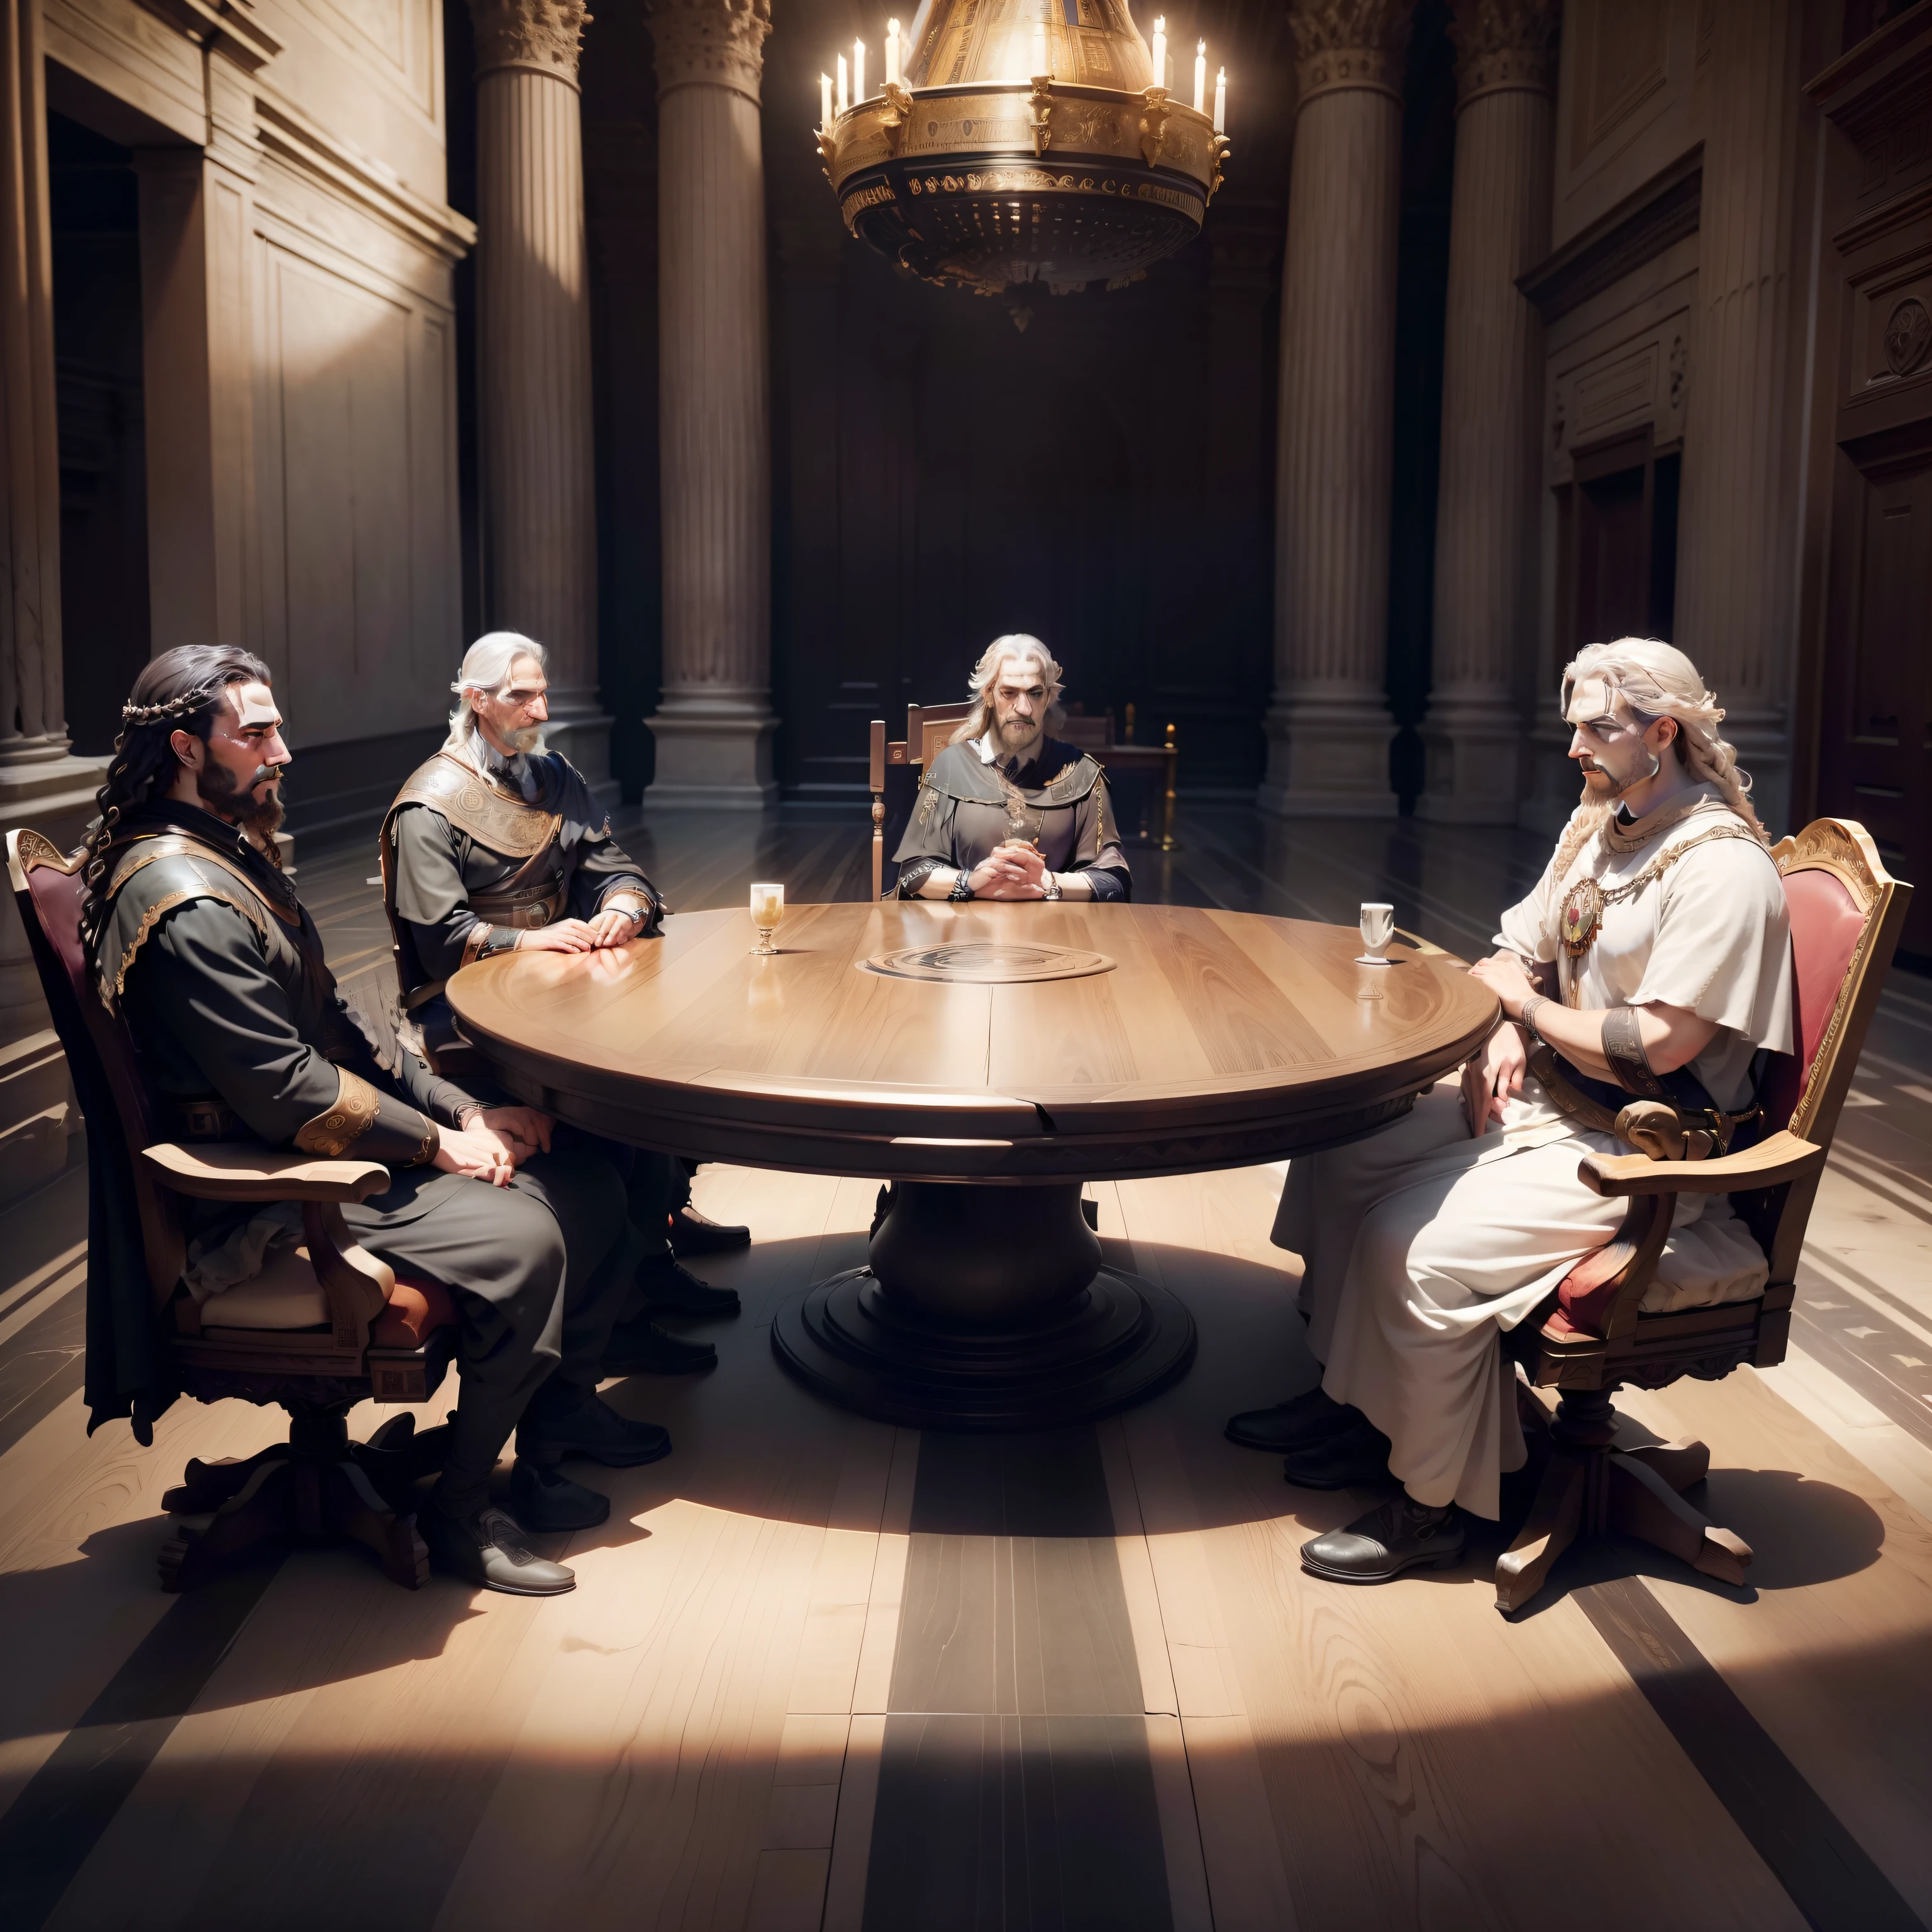 ((Majestic and ominous) five high ranked Roman senators dramatically sitting around a massive ancient table in the grand hall of the Roman Senate building. Lifelike expressions and intense gazes as they unveil their elaborate plot). Incredibly intricate facial details. Historical.